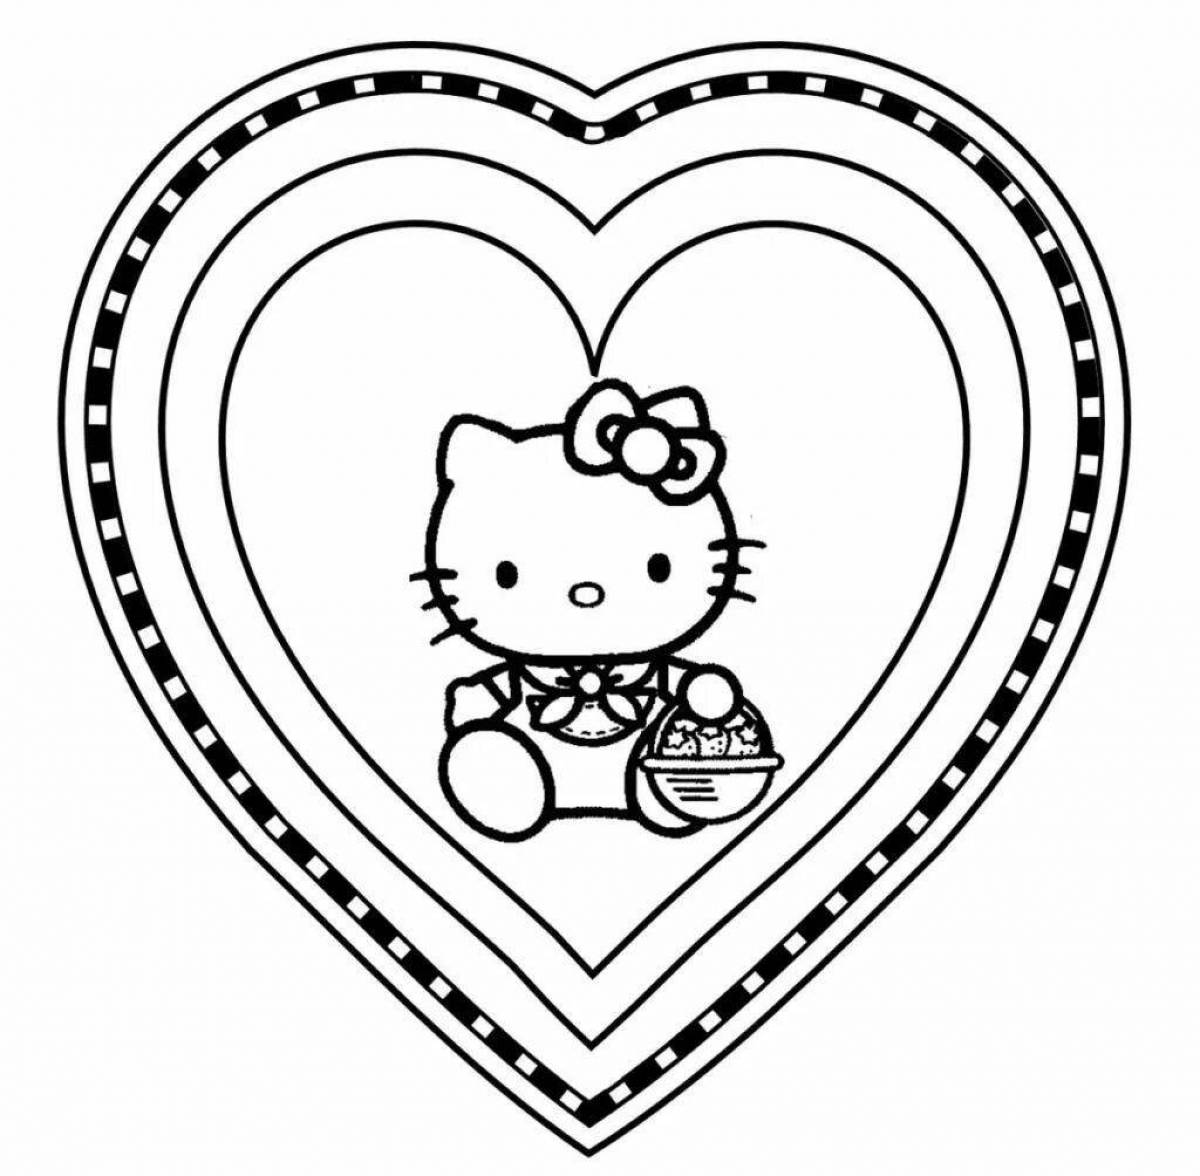 Color-crazy heart coloring page for children 5-6 years old